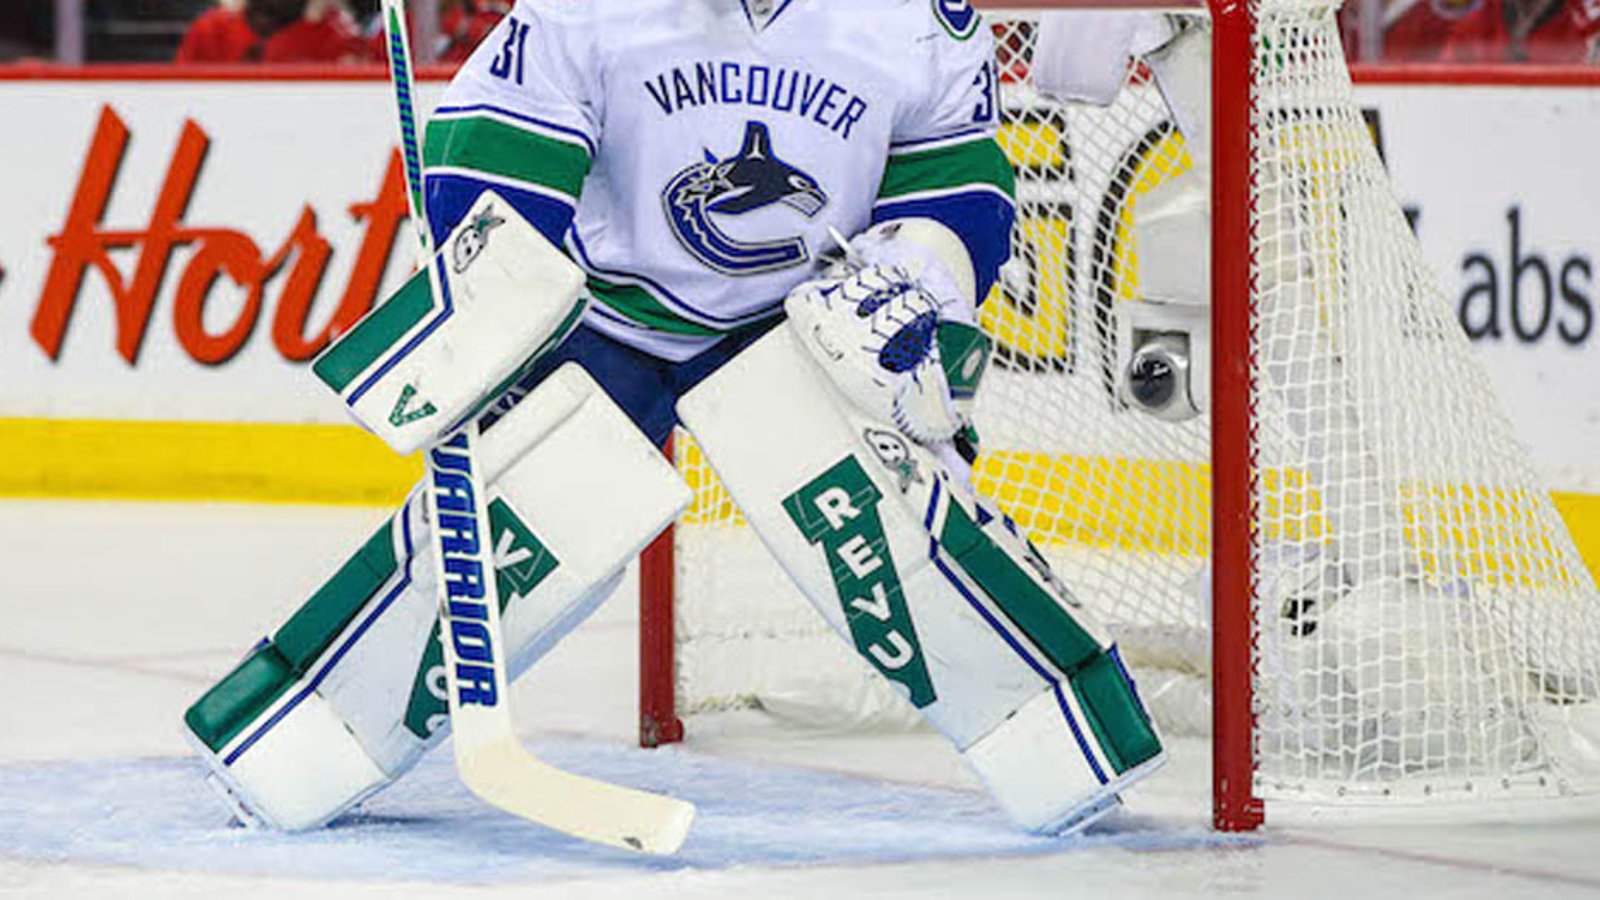 Former Canucks goalie says he'll come out of retirement to play for Demko